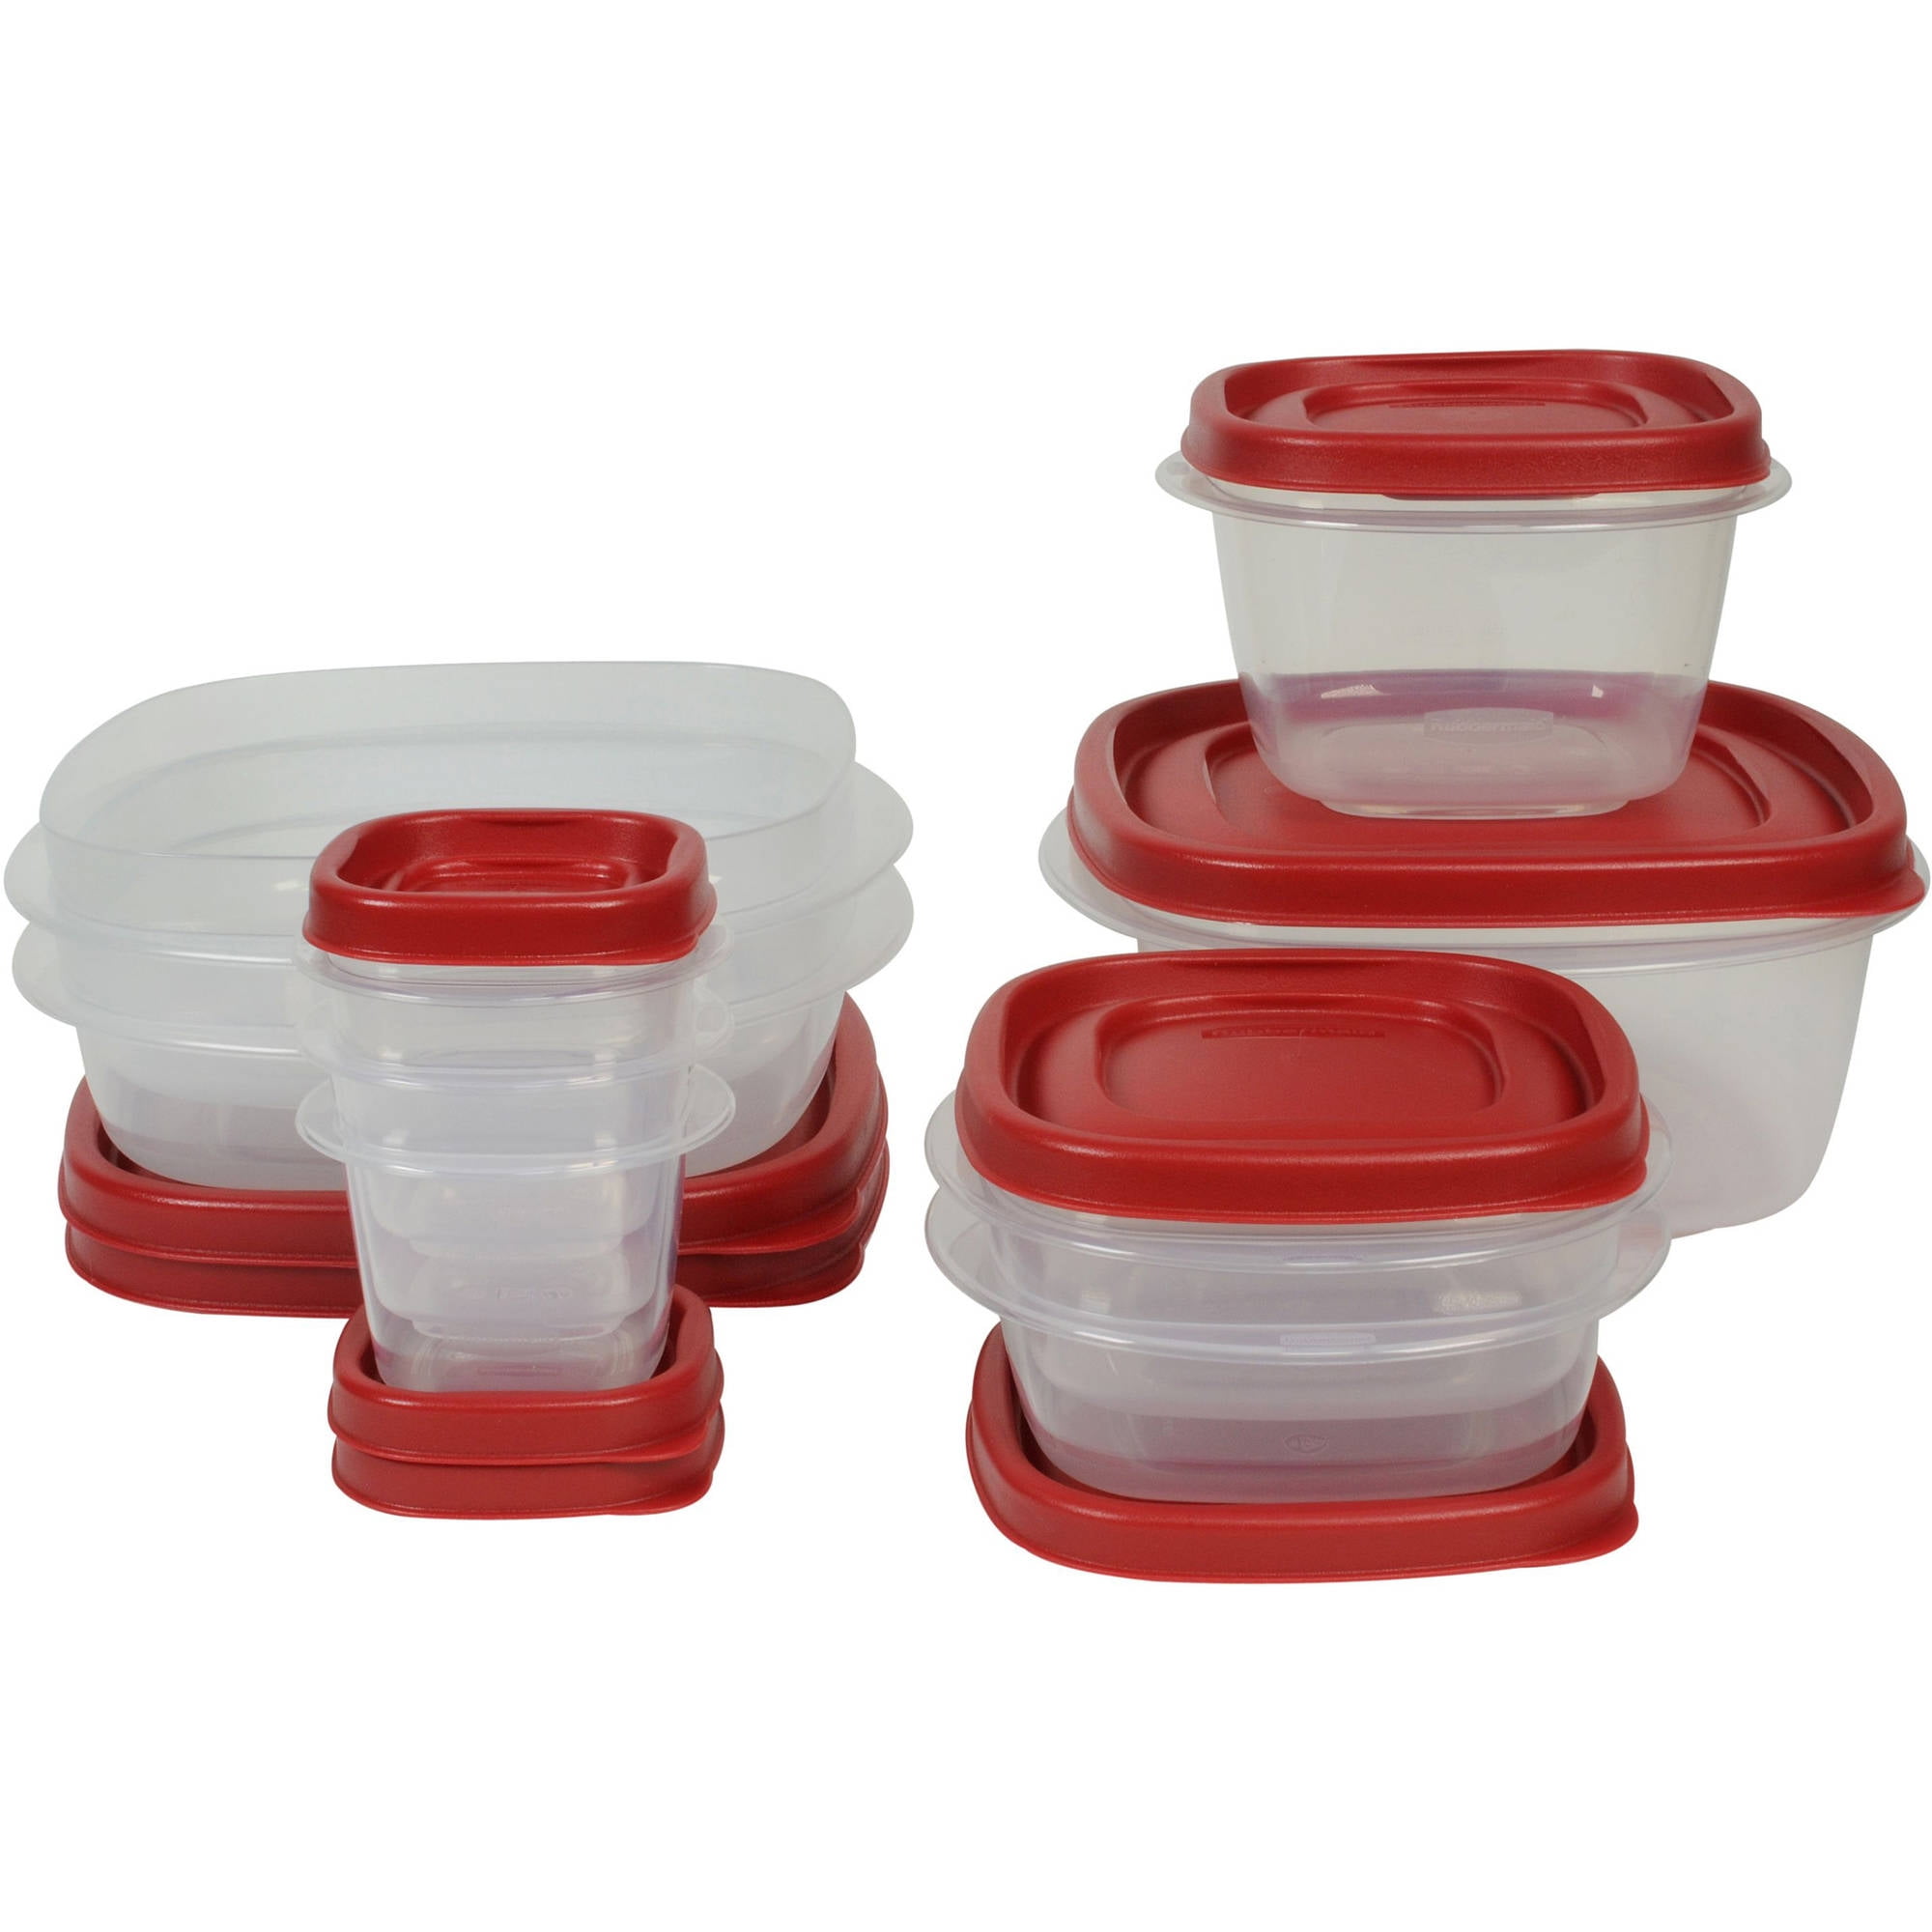 Rubbermaid Easy Find Lids Container Set - Shop Food Storage at H-E-B